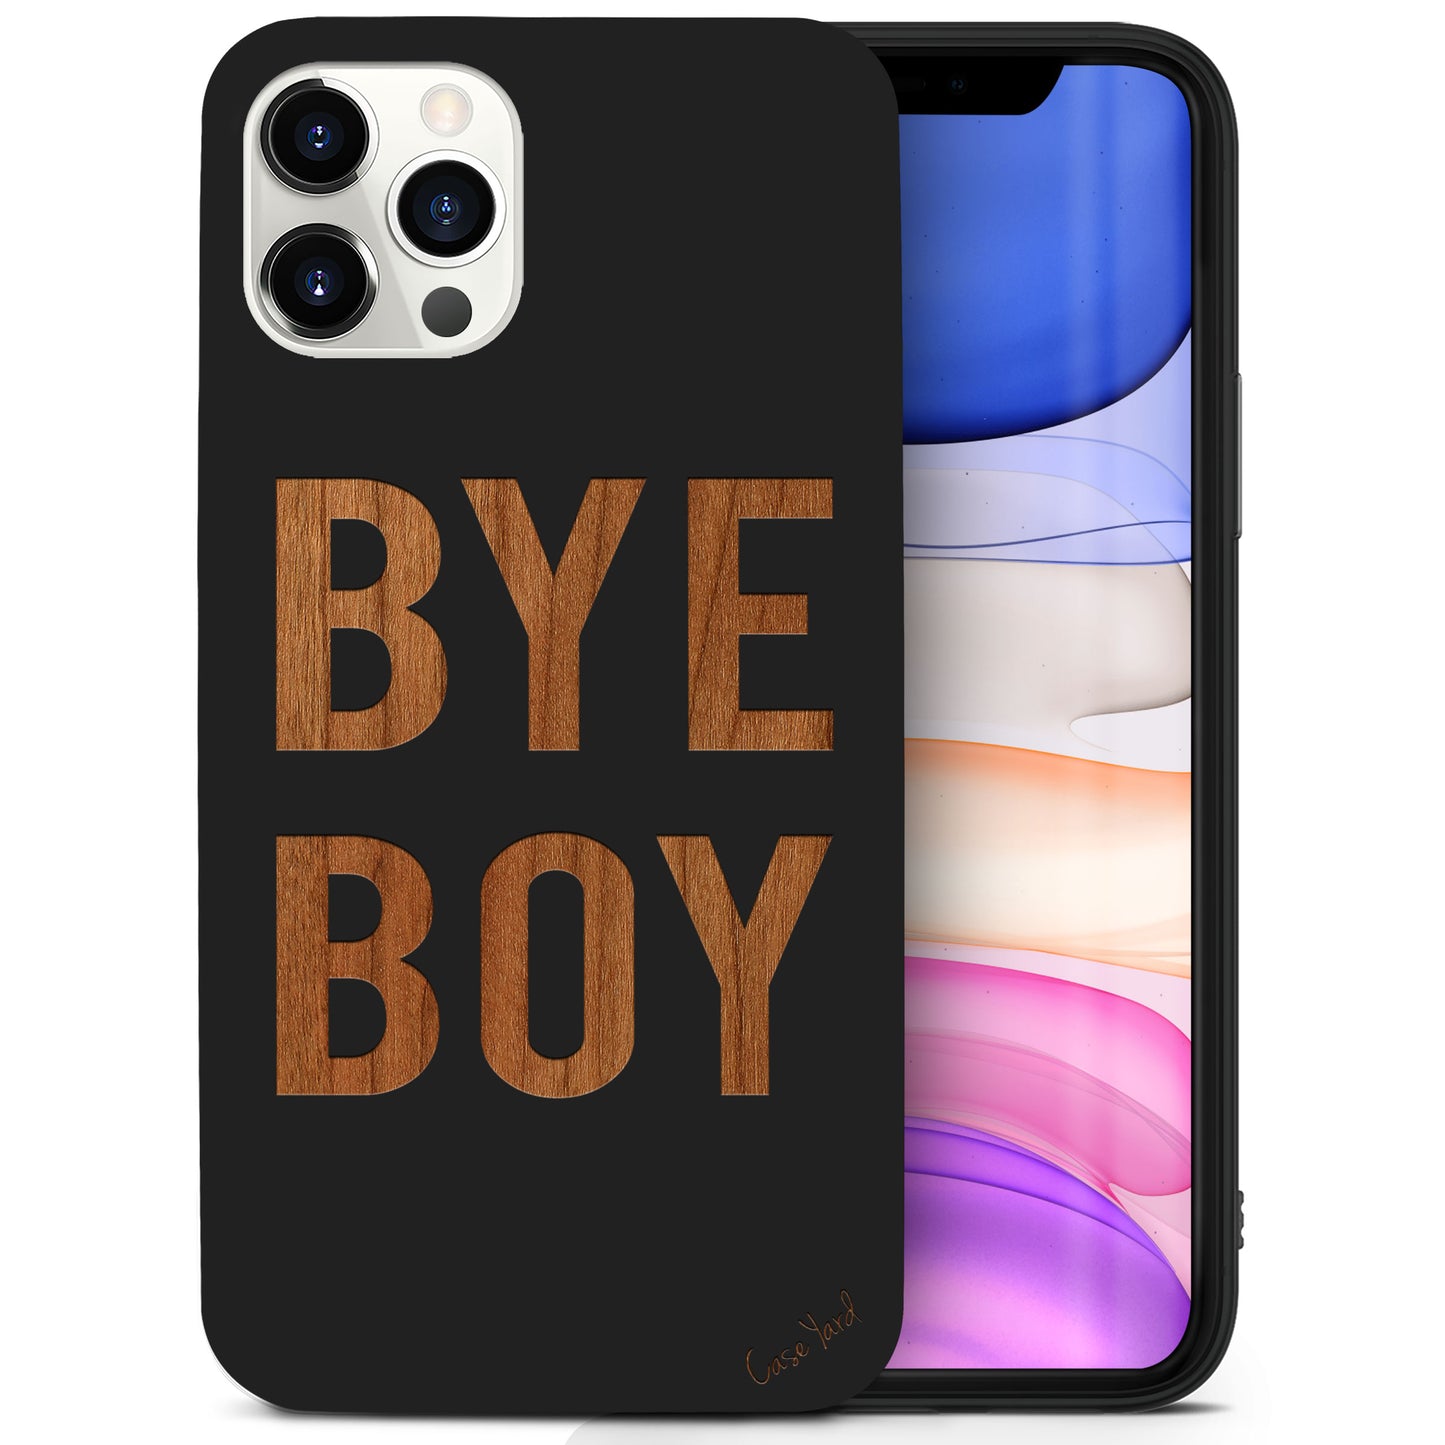 Wooden Cell Phone Case Cover, Laser Engraved case for iPhone & Samsung phone Bye Boy Design